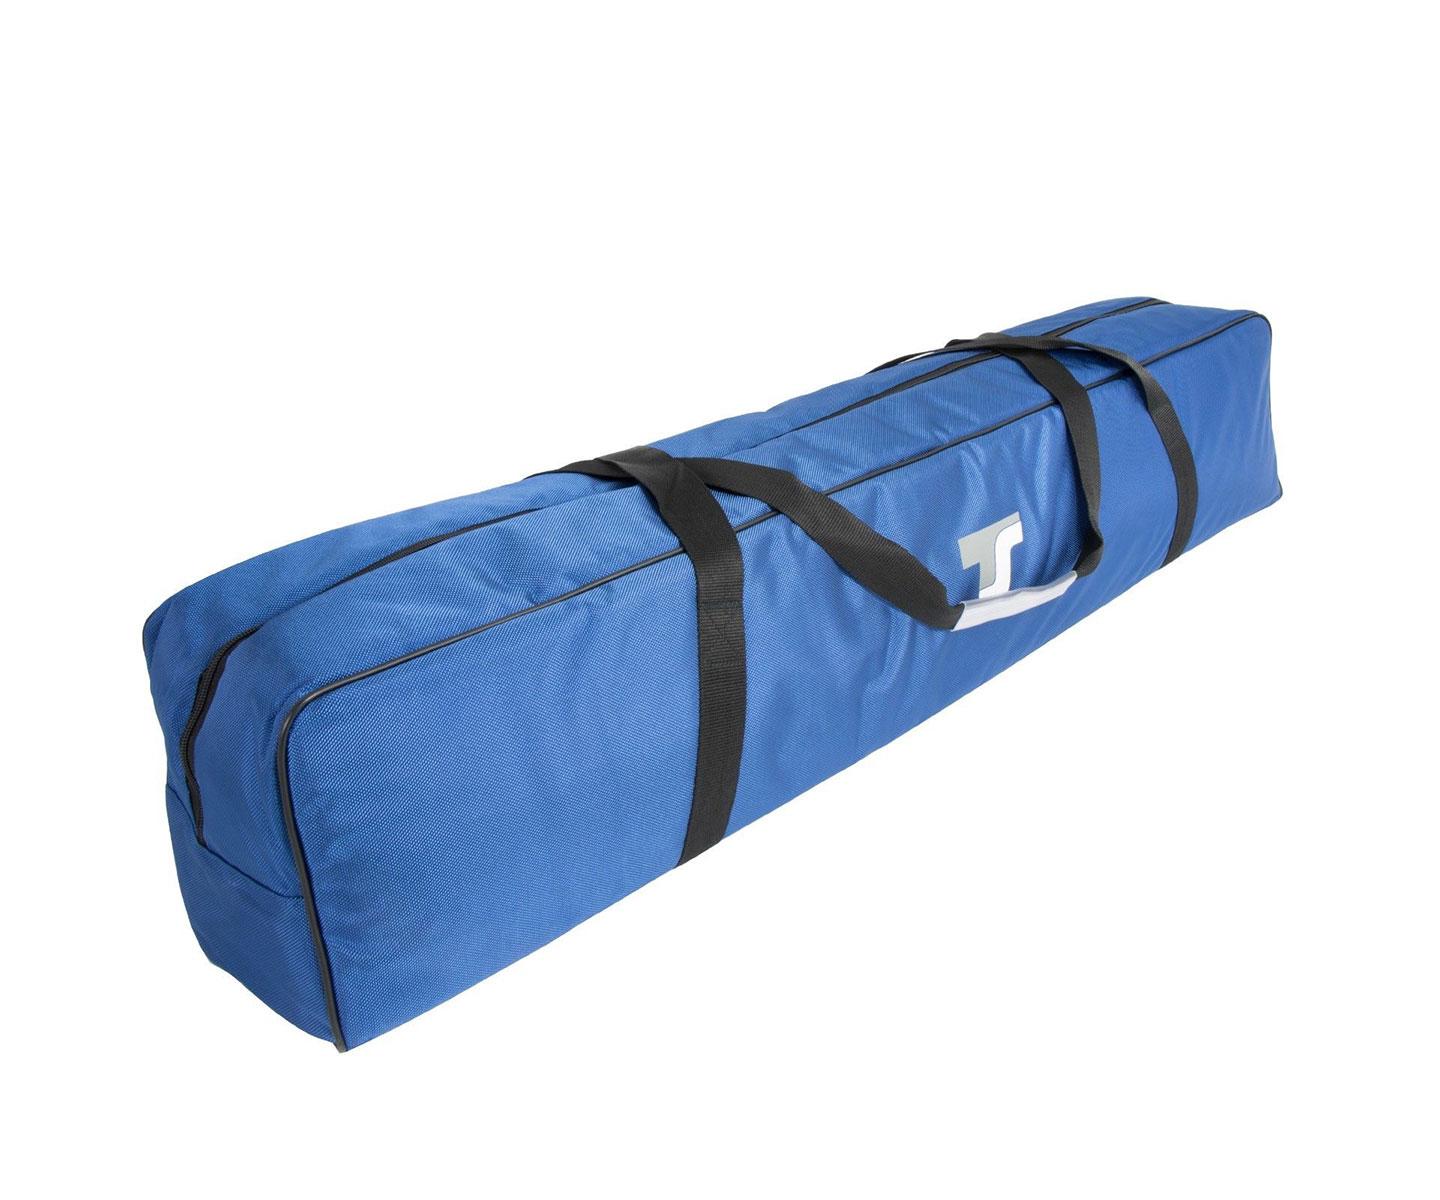    TS-Optics padded Carrying Case L=110 cm for Tripods and Telescopes  [EN]  